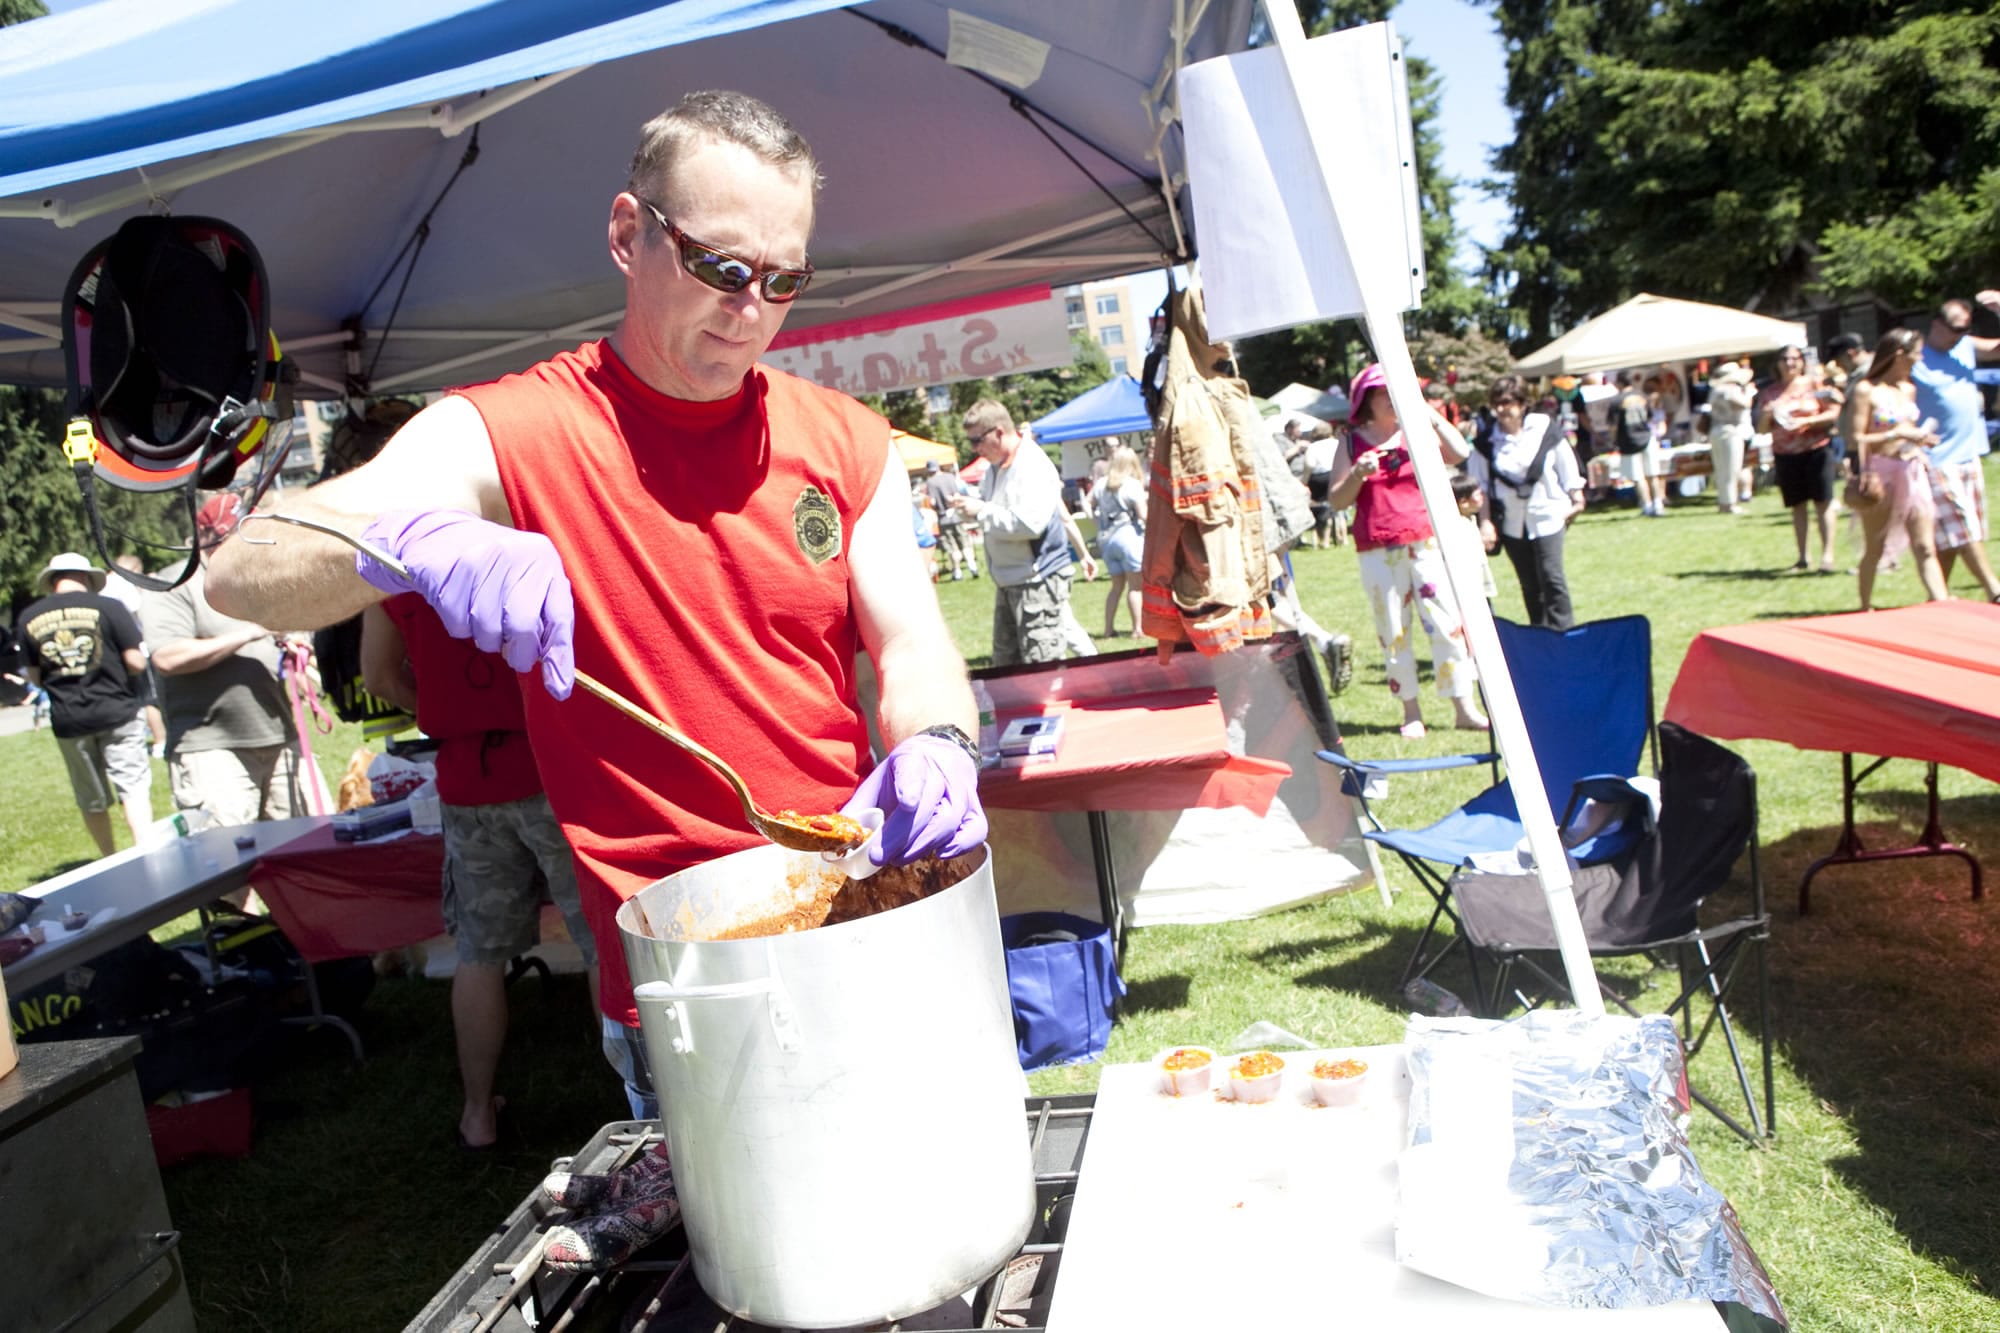 Drew Tracy of Station 8 pours samples of their Smoked Chicken Chipoltle Chili during The Fire Fighter's Chili Cookoff which brought large crowds of people to Esther Short Park Saturday afternoon to raise money for the homeless.